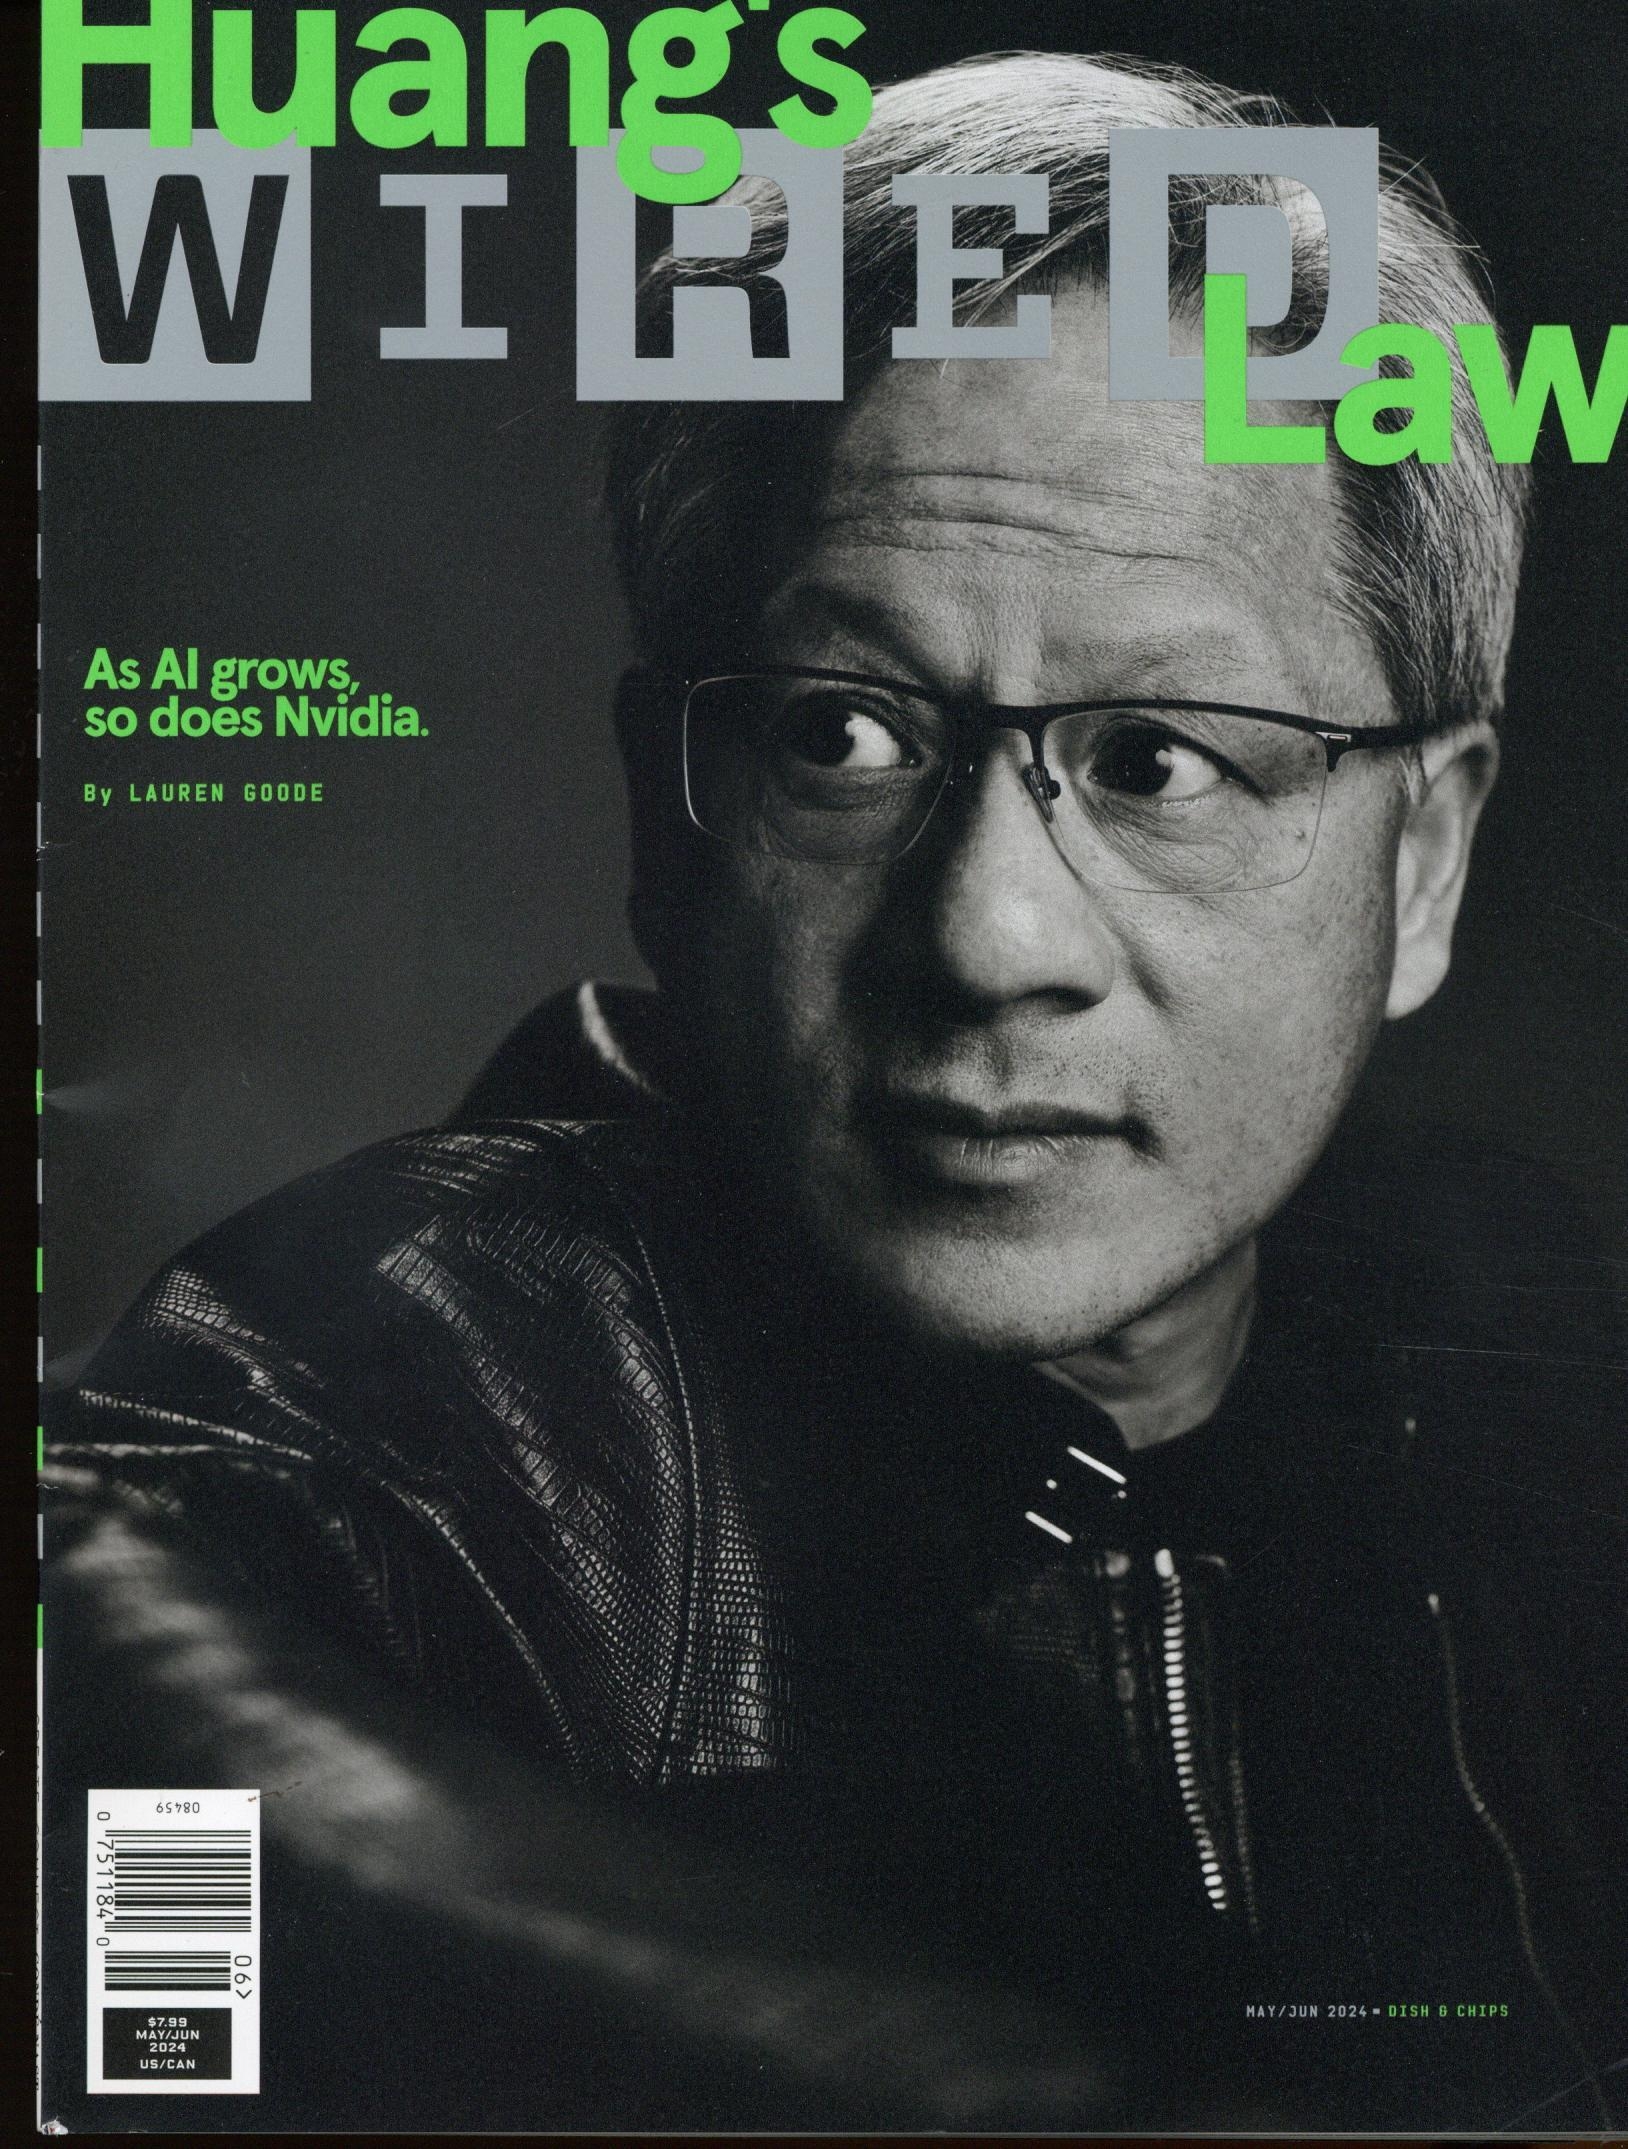 Wired (Us)